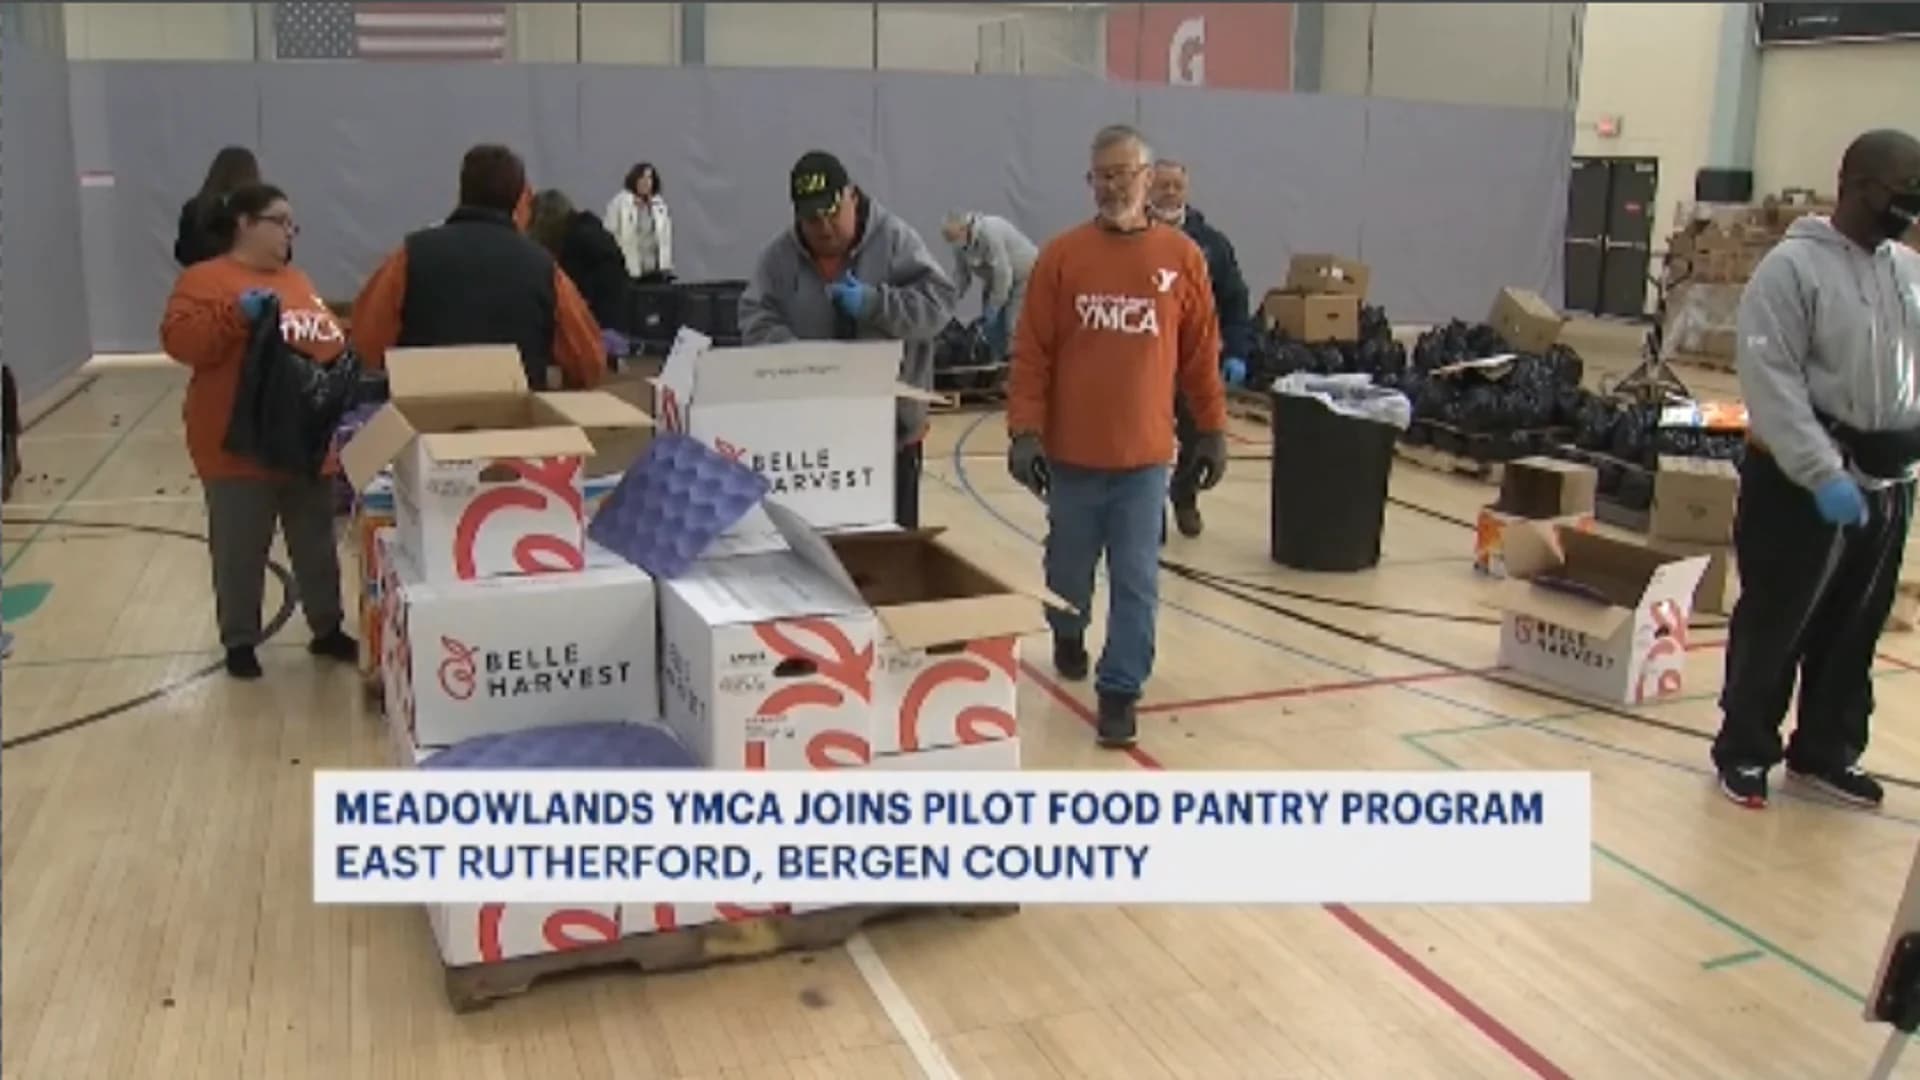 Meadowlands YMCA joins program to become traditional food pantry